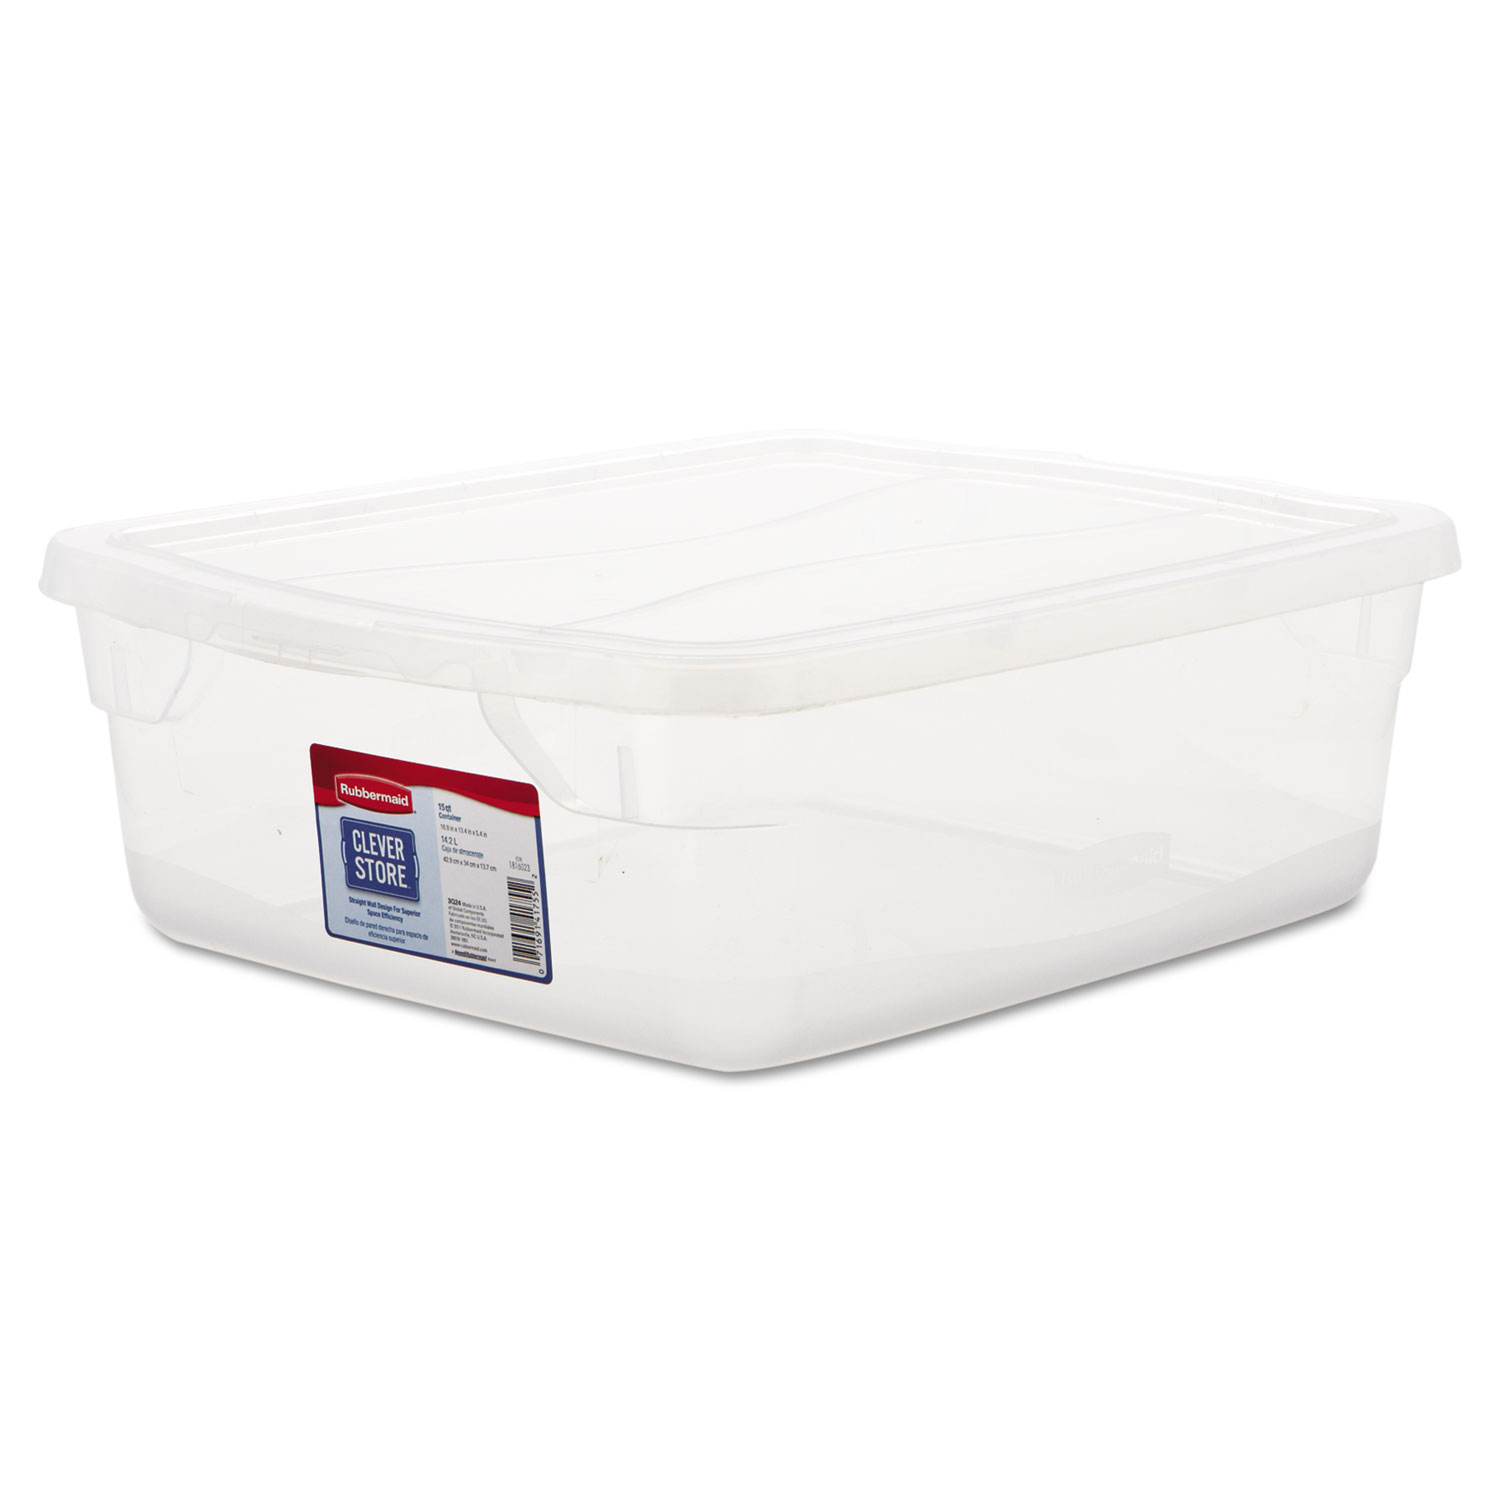 Clever Store Snap-Lid Container, 13 3/8 x 16 7/8 x 5 3/8, 15 qt, Clear